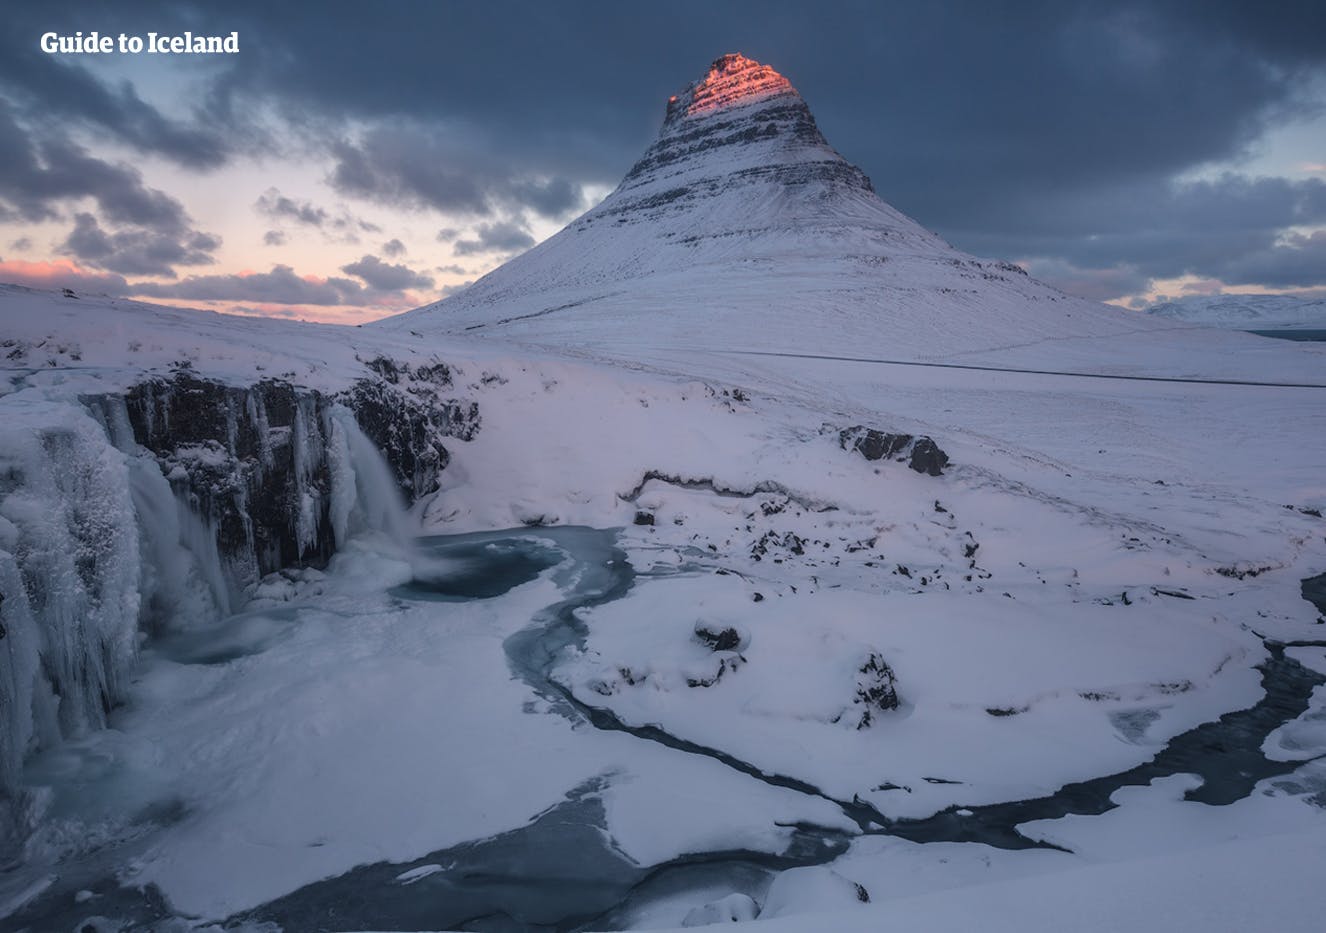 The Snæfellsnes Peninsula in Iceland is home to the mountains Kirkjufell, photographed here in winter.